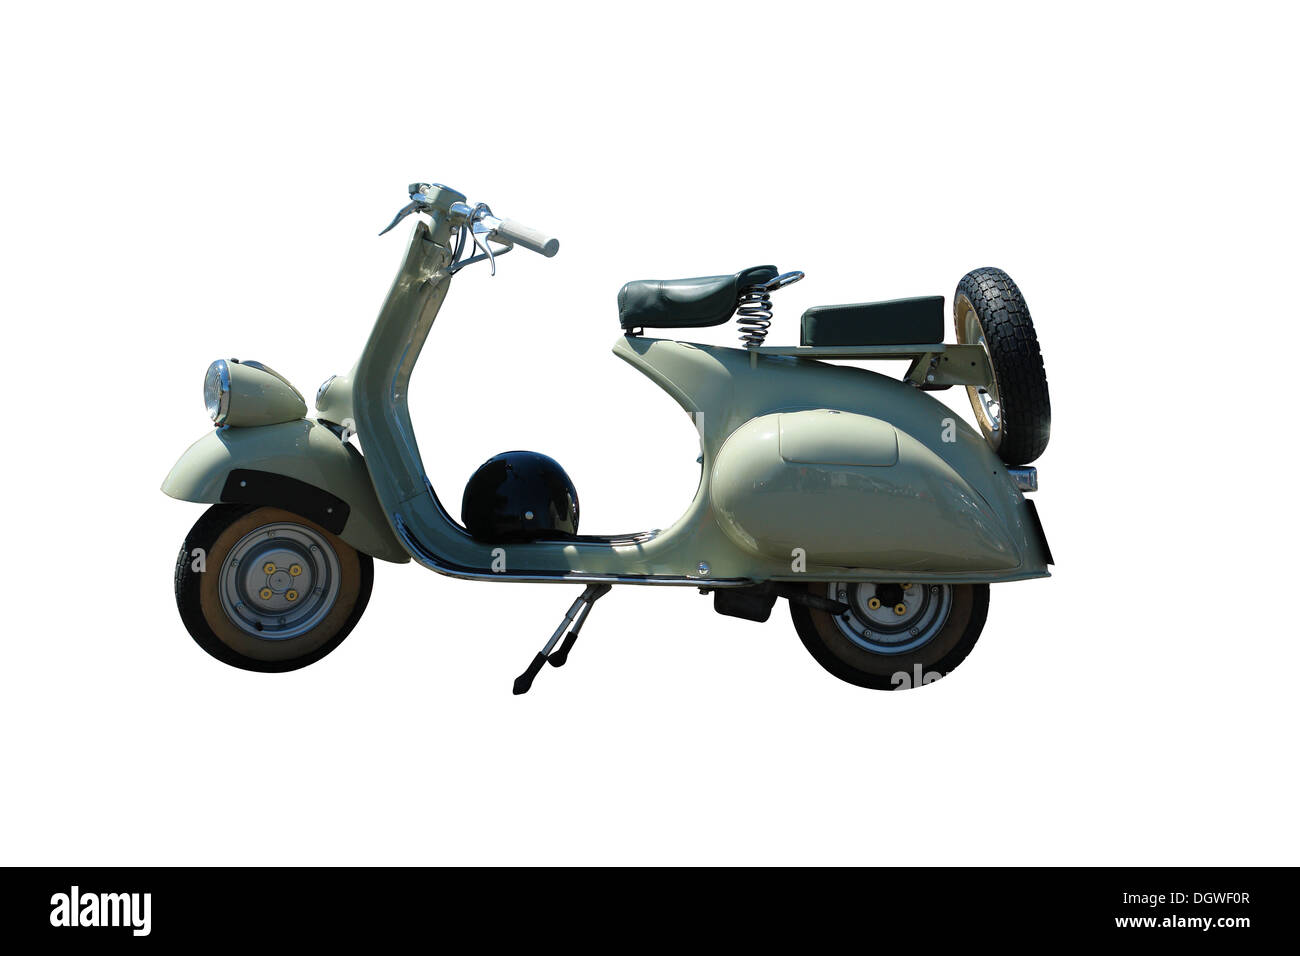 Vintage green vespa scooter. path is included on Stock Photo Alamy